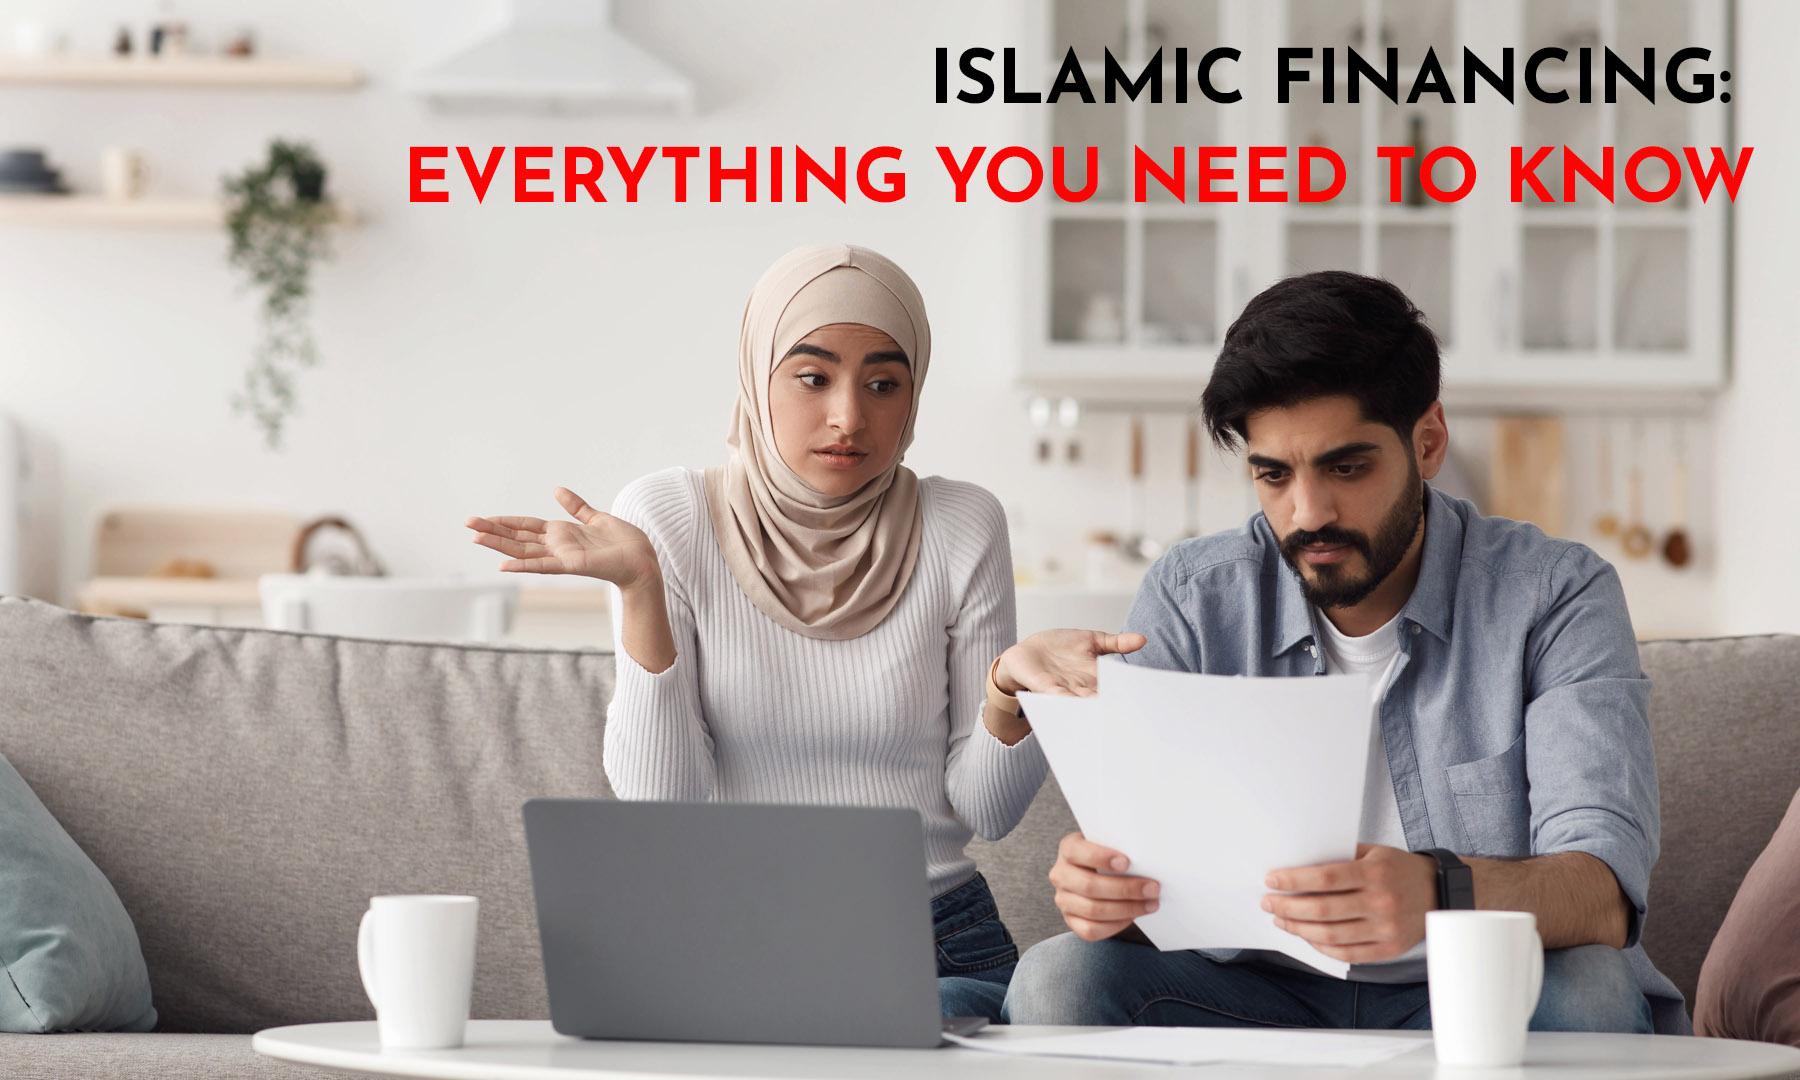 ISLAMIC FINANCING: EVERYTHING YOU NEED TO KNOW